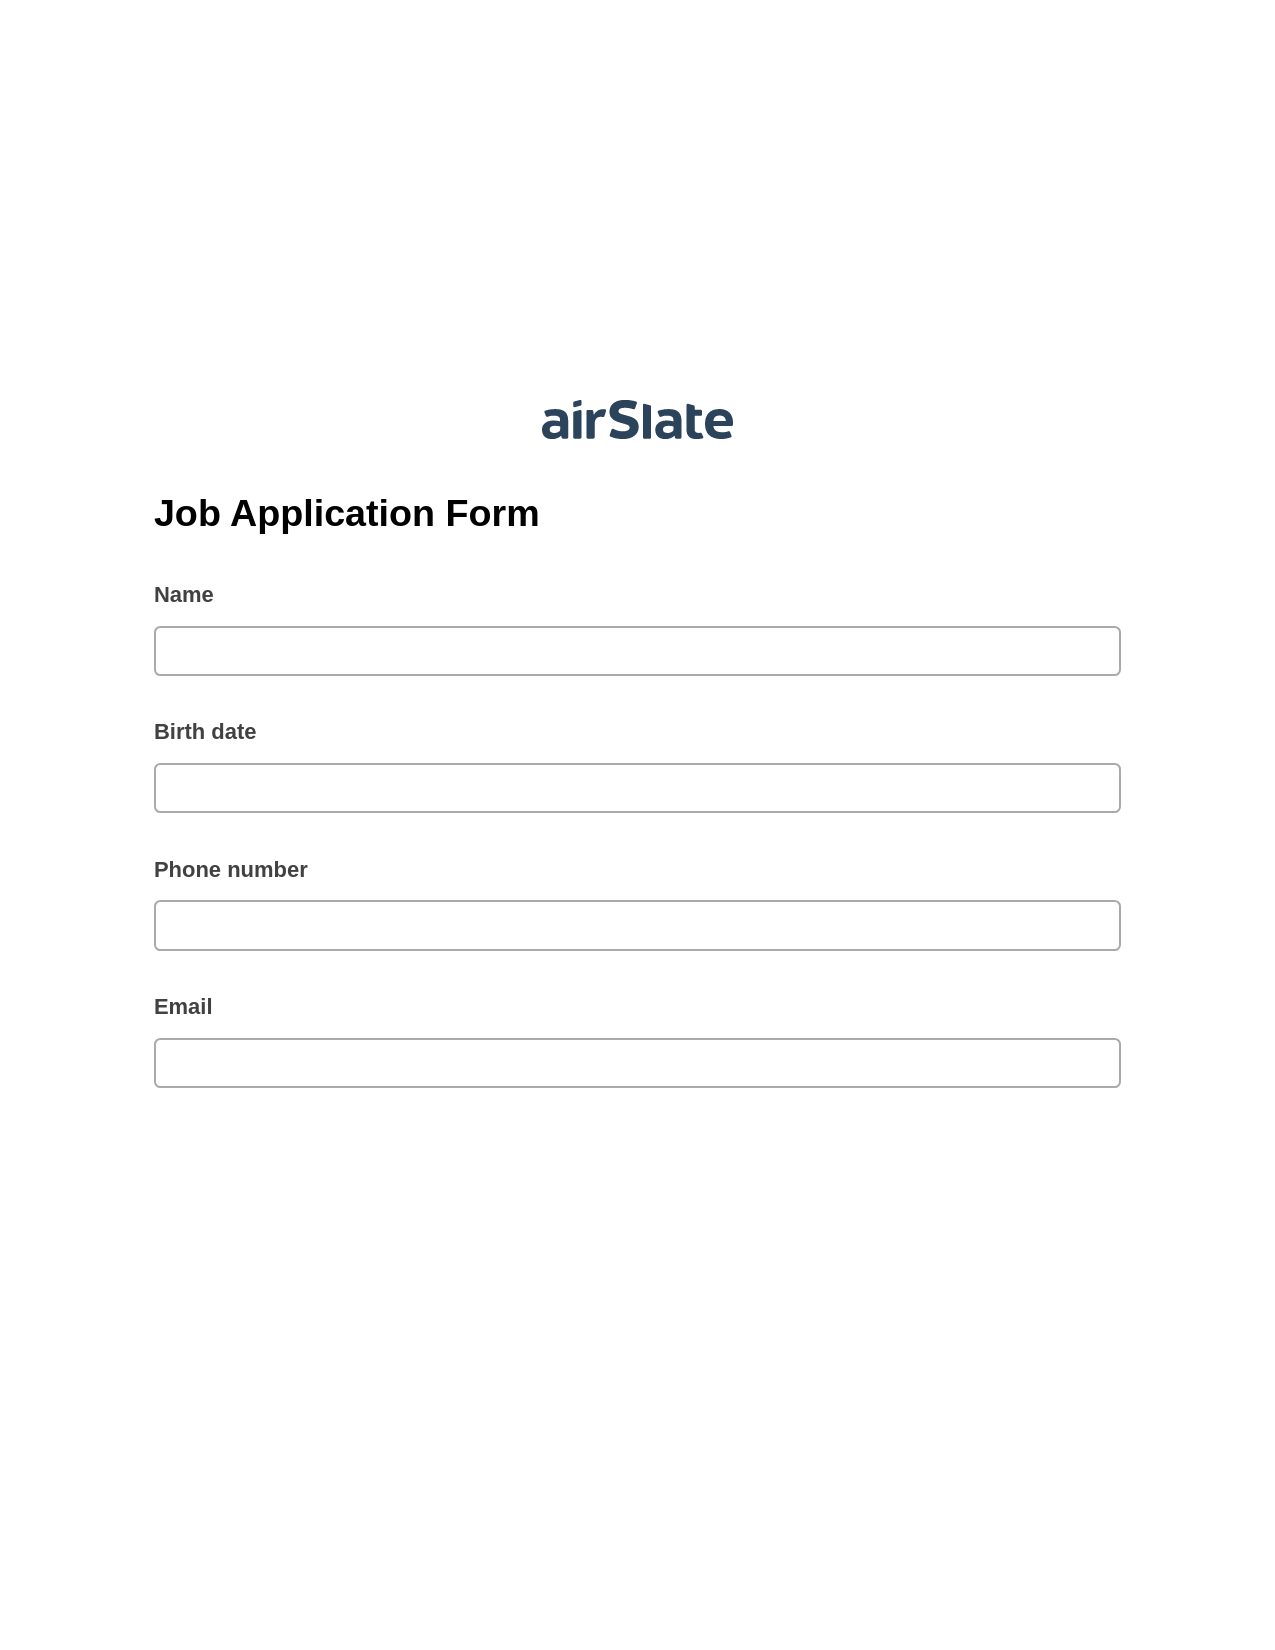 Multirole Job Application Form Pre-fill from Google Sheets Bot, Create MS Dynamics 365 Records Bot, Post-finish Document Bot